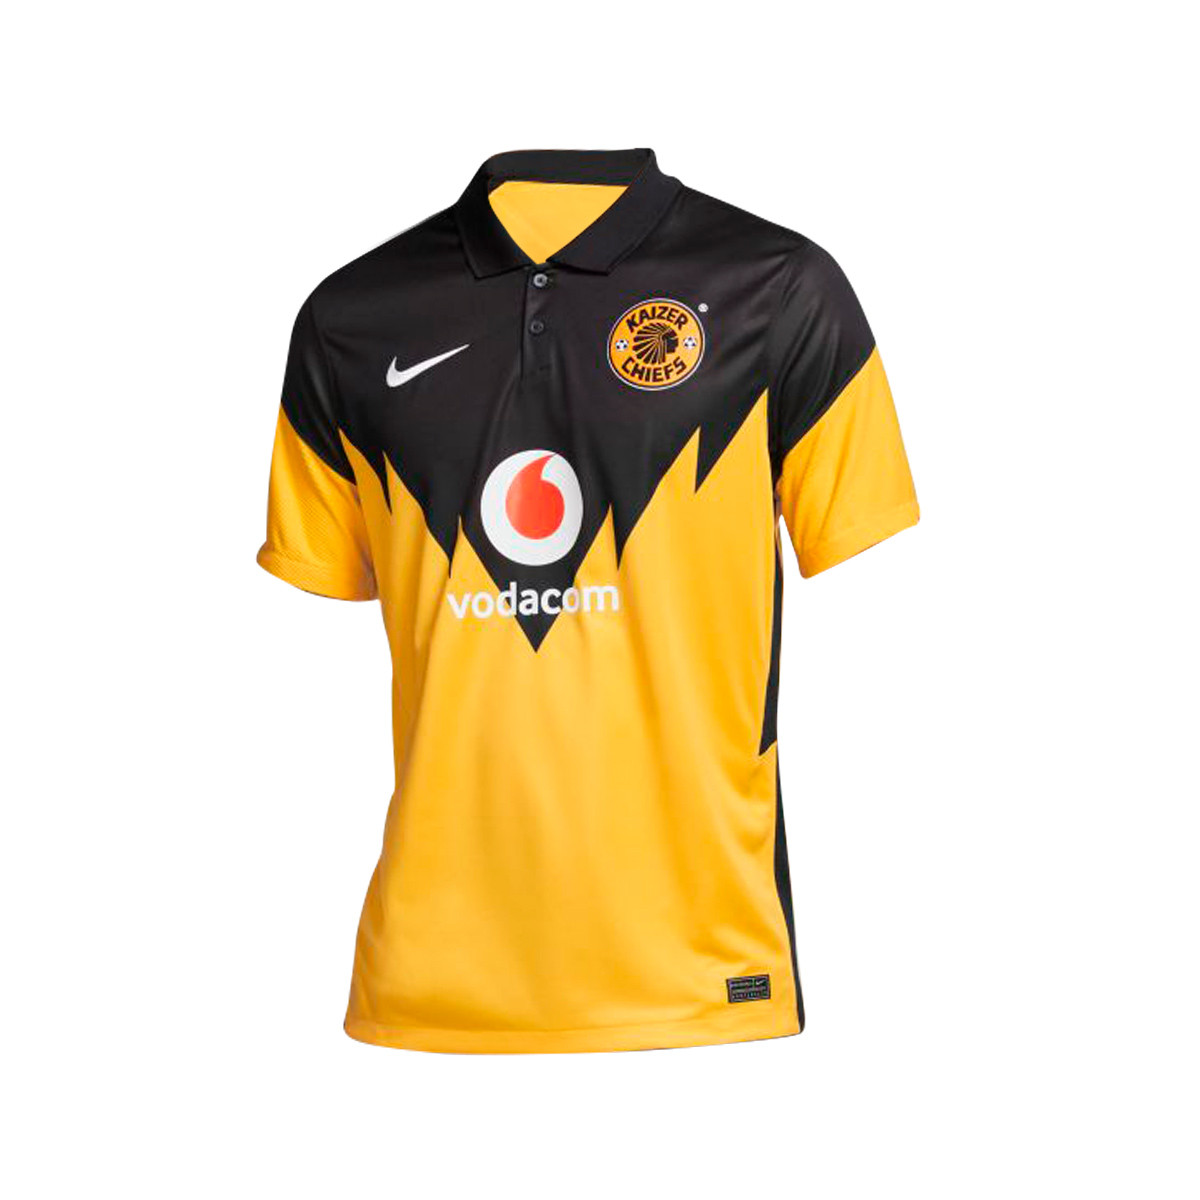 kaizer chiefs jersey at total sport